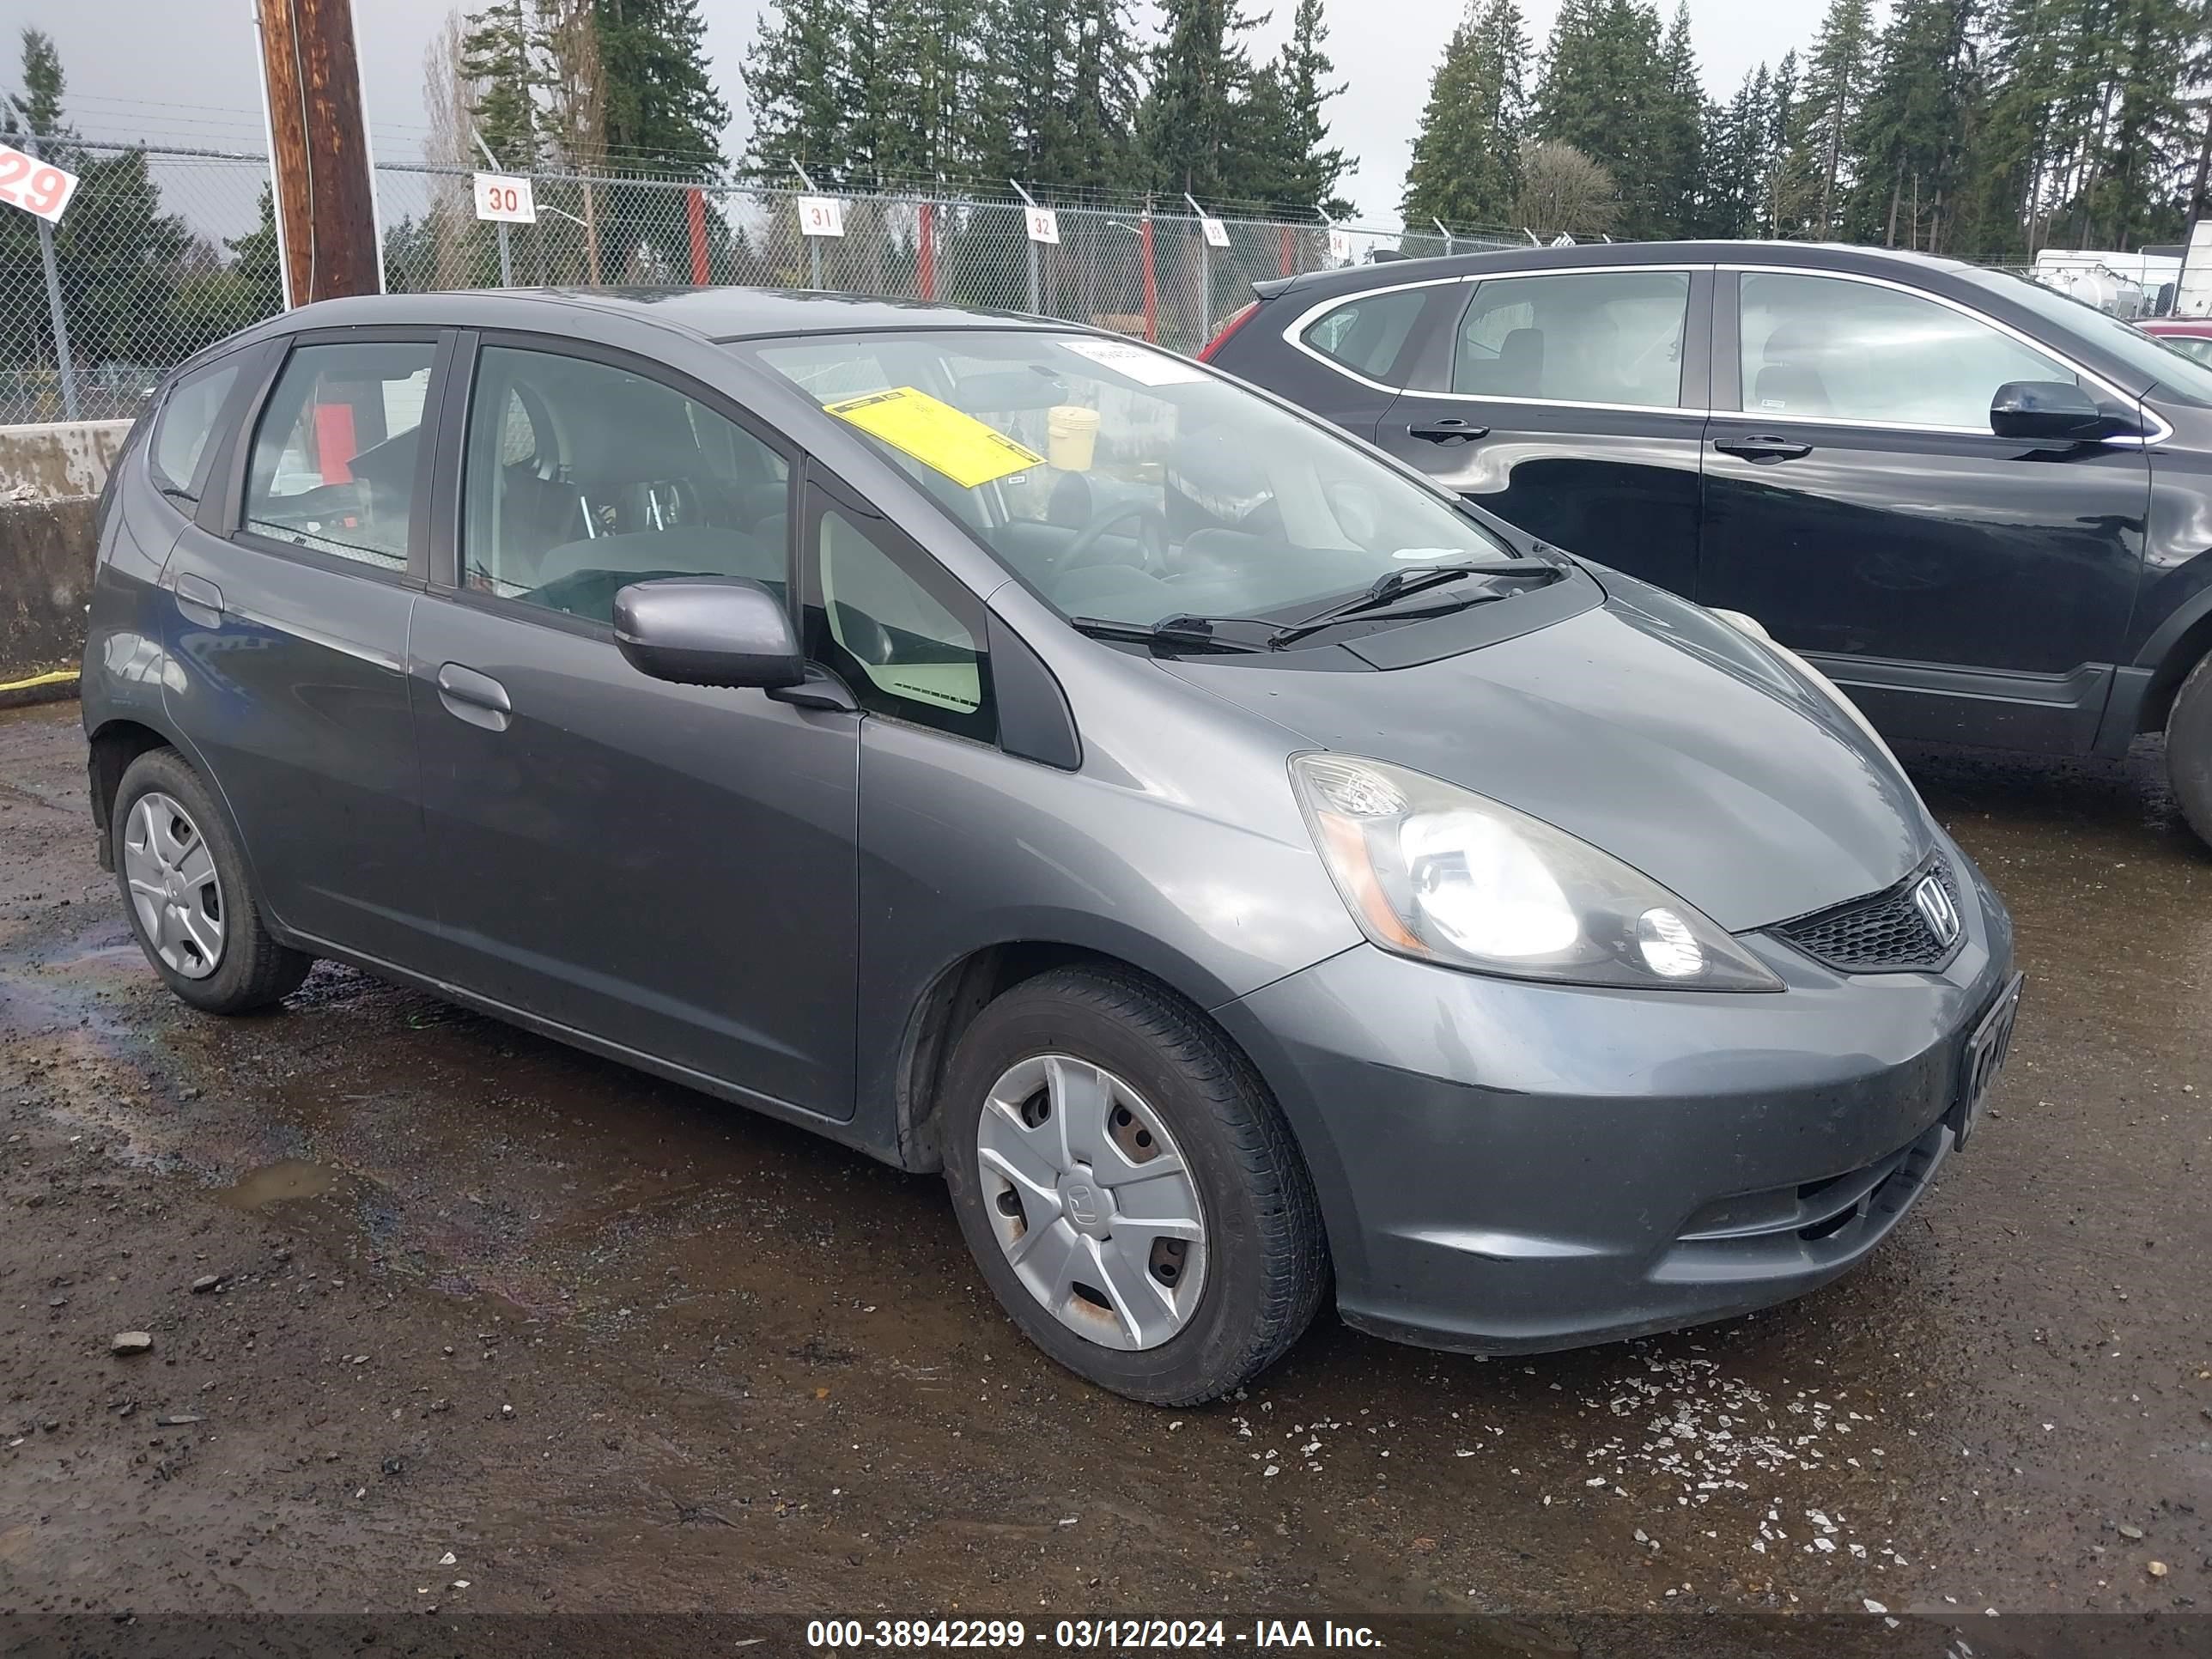 vin: JHMGE8G34CS002498 JHMGE8G34CS002498 2012 honda fit 1500 for Sale in 98374, 15801 110Th Ave E, Puyallup, Washington, USA